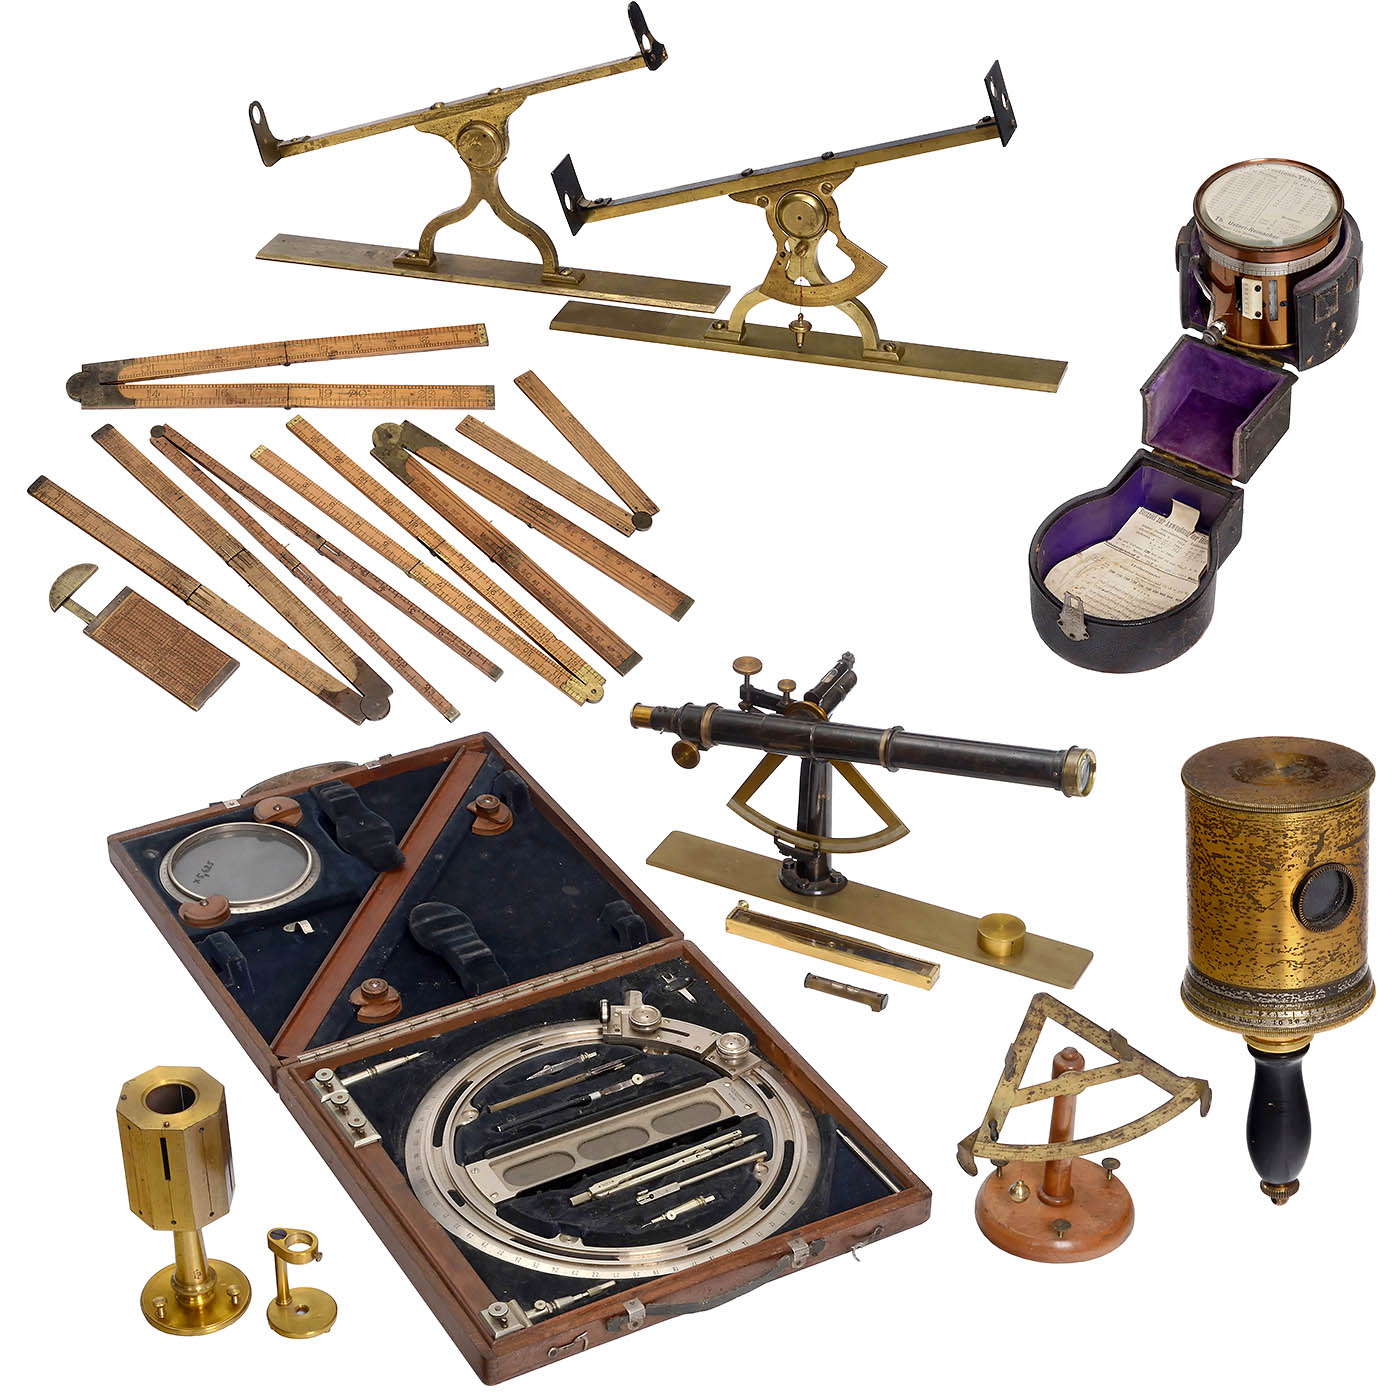 Group of Measuring and Surveying Instruments